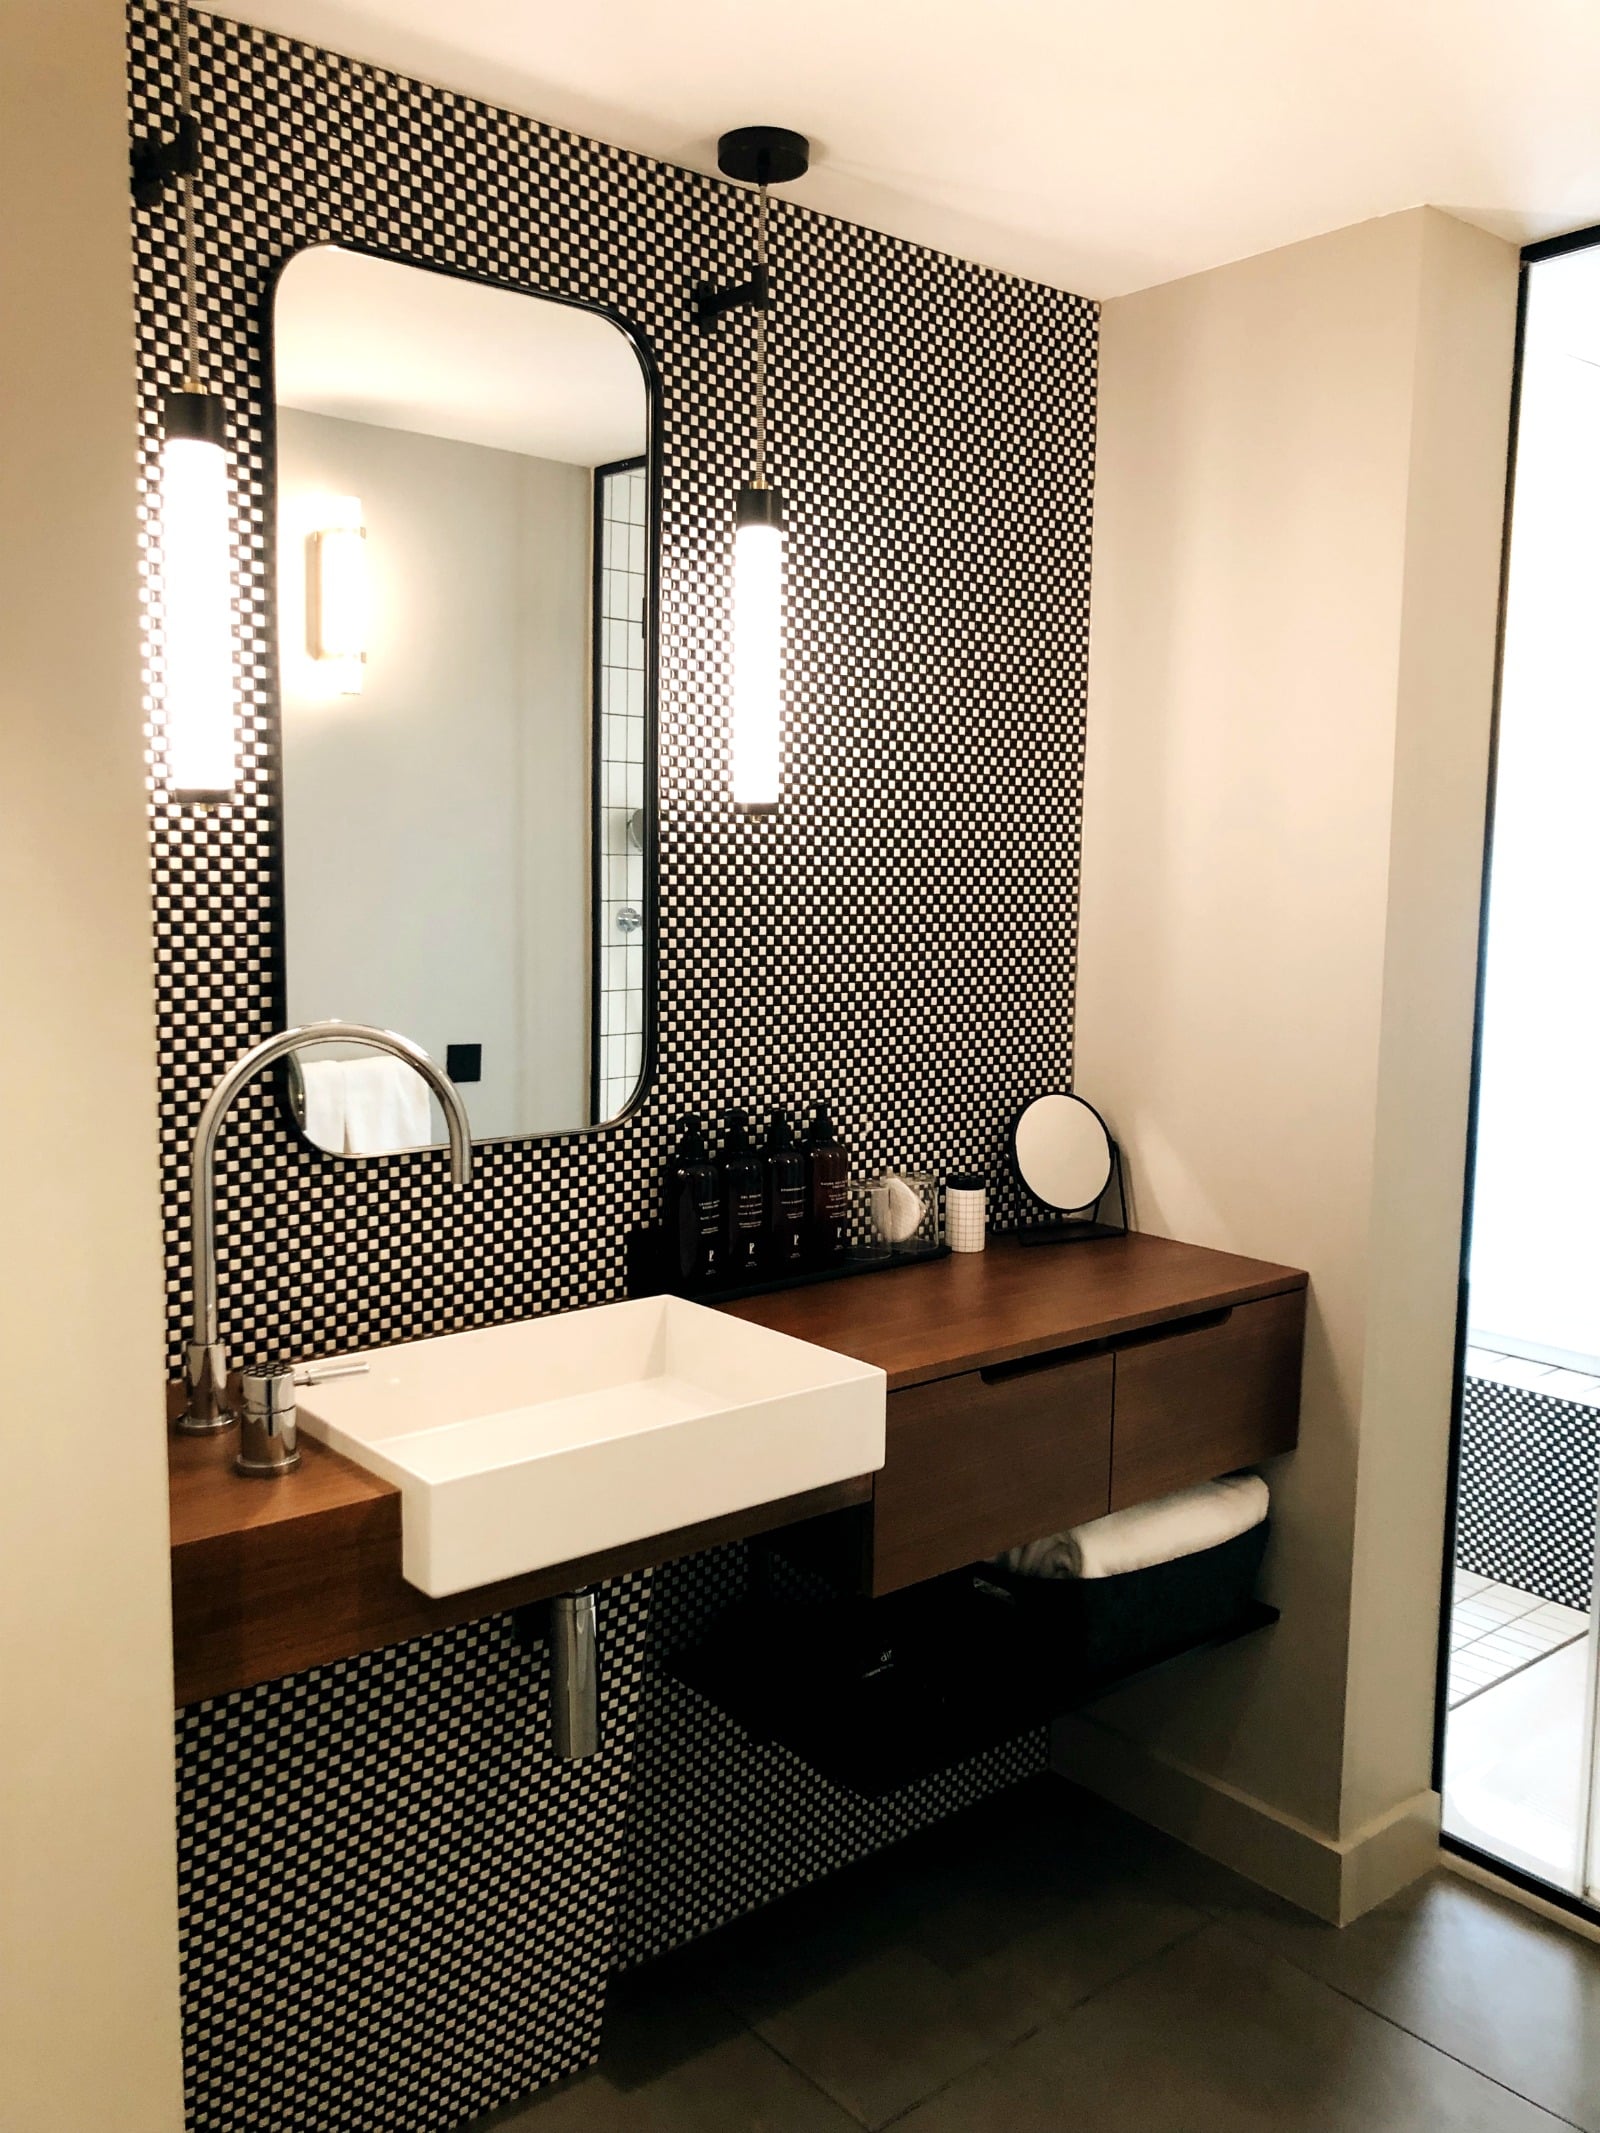 Hotel Flanelles bathroom | How to Spend a Long Weekend in Paris